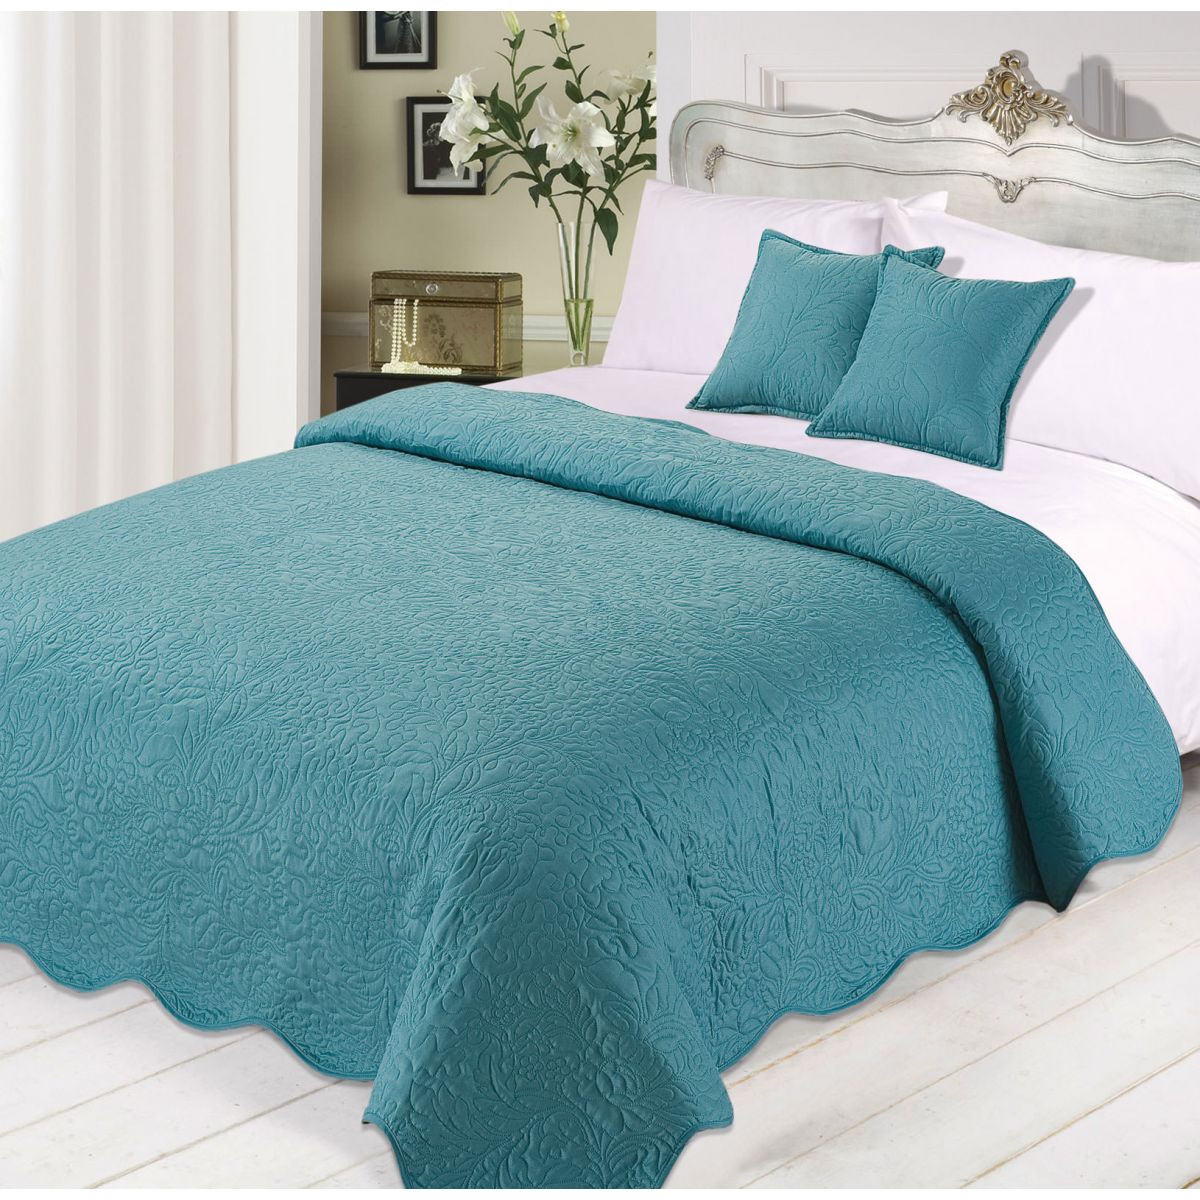 Quilted Embossed Bedspread with Cushions Set -Teal